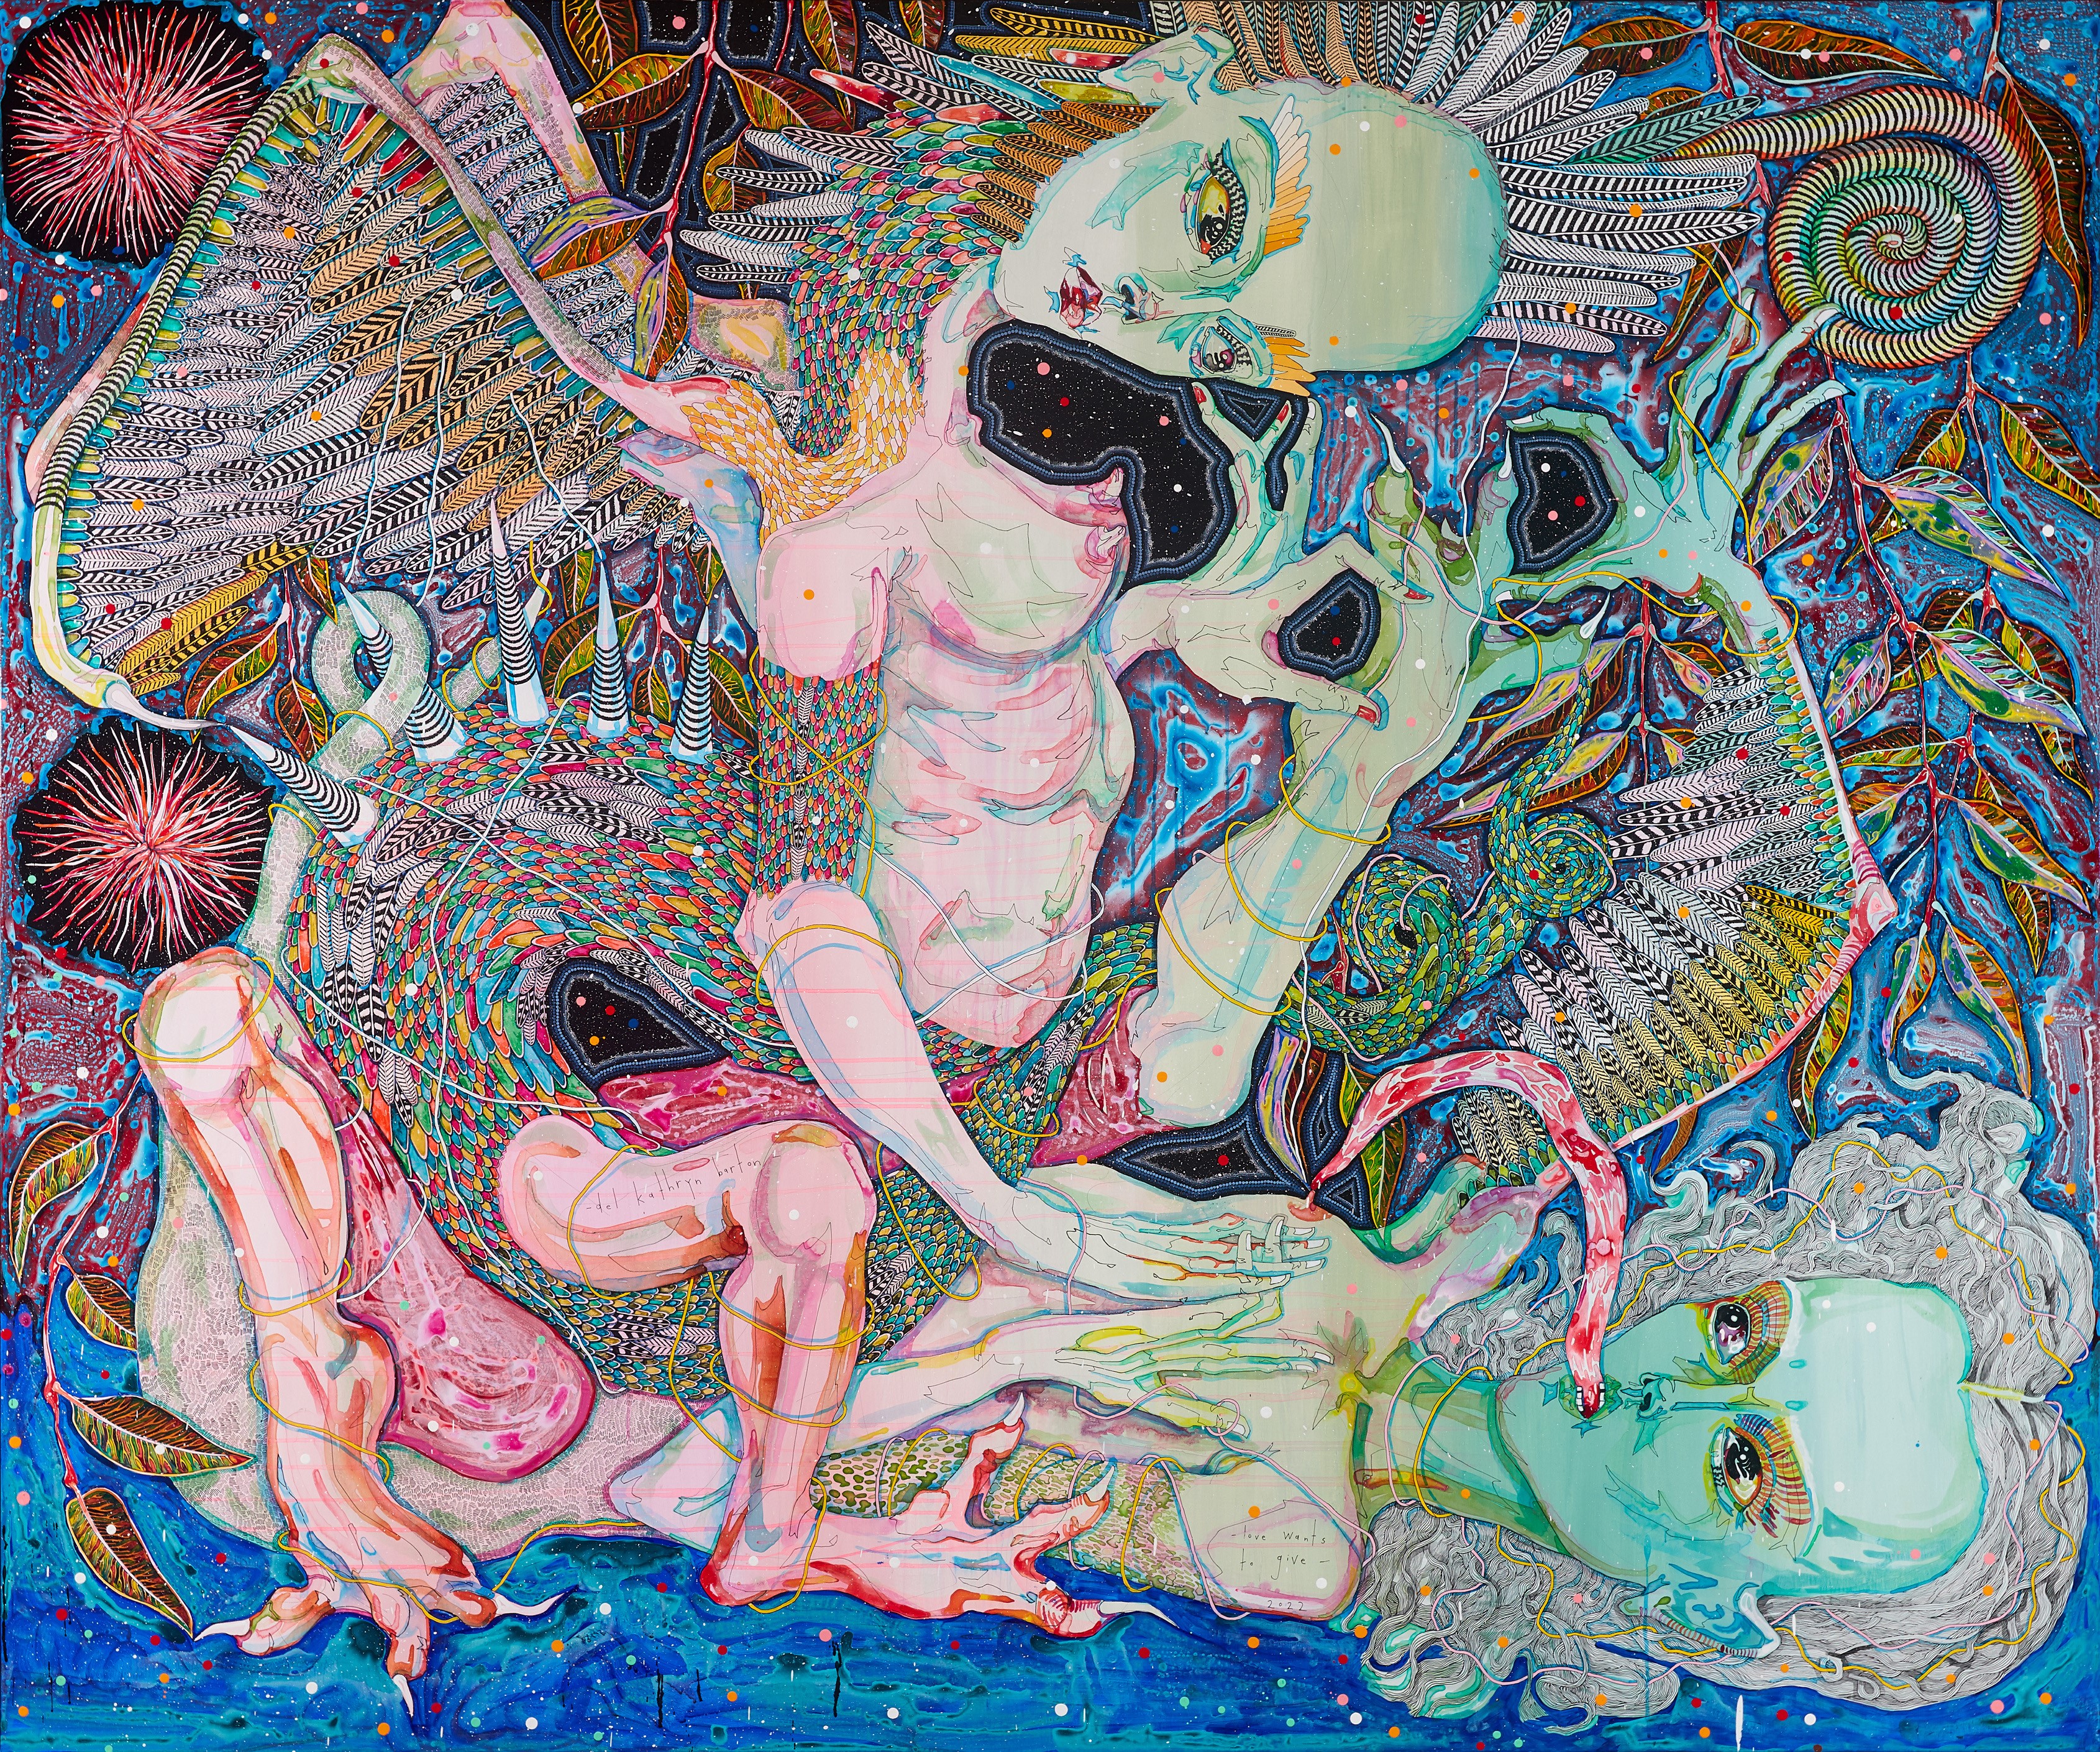 Large painted work featuring two intertwined hybrid female/animal/creature figures. One is laying on the ground and the other, which has wings and bare breasts sits on top of it. The works primary colours are pinks, blacks and blues, with touches of yellow an red.